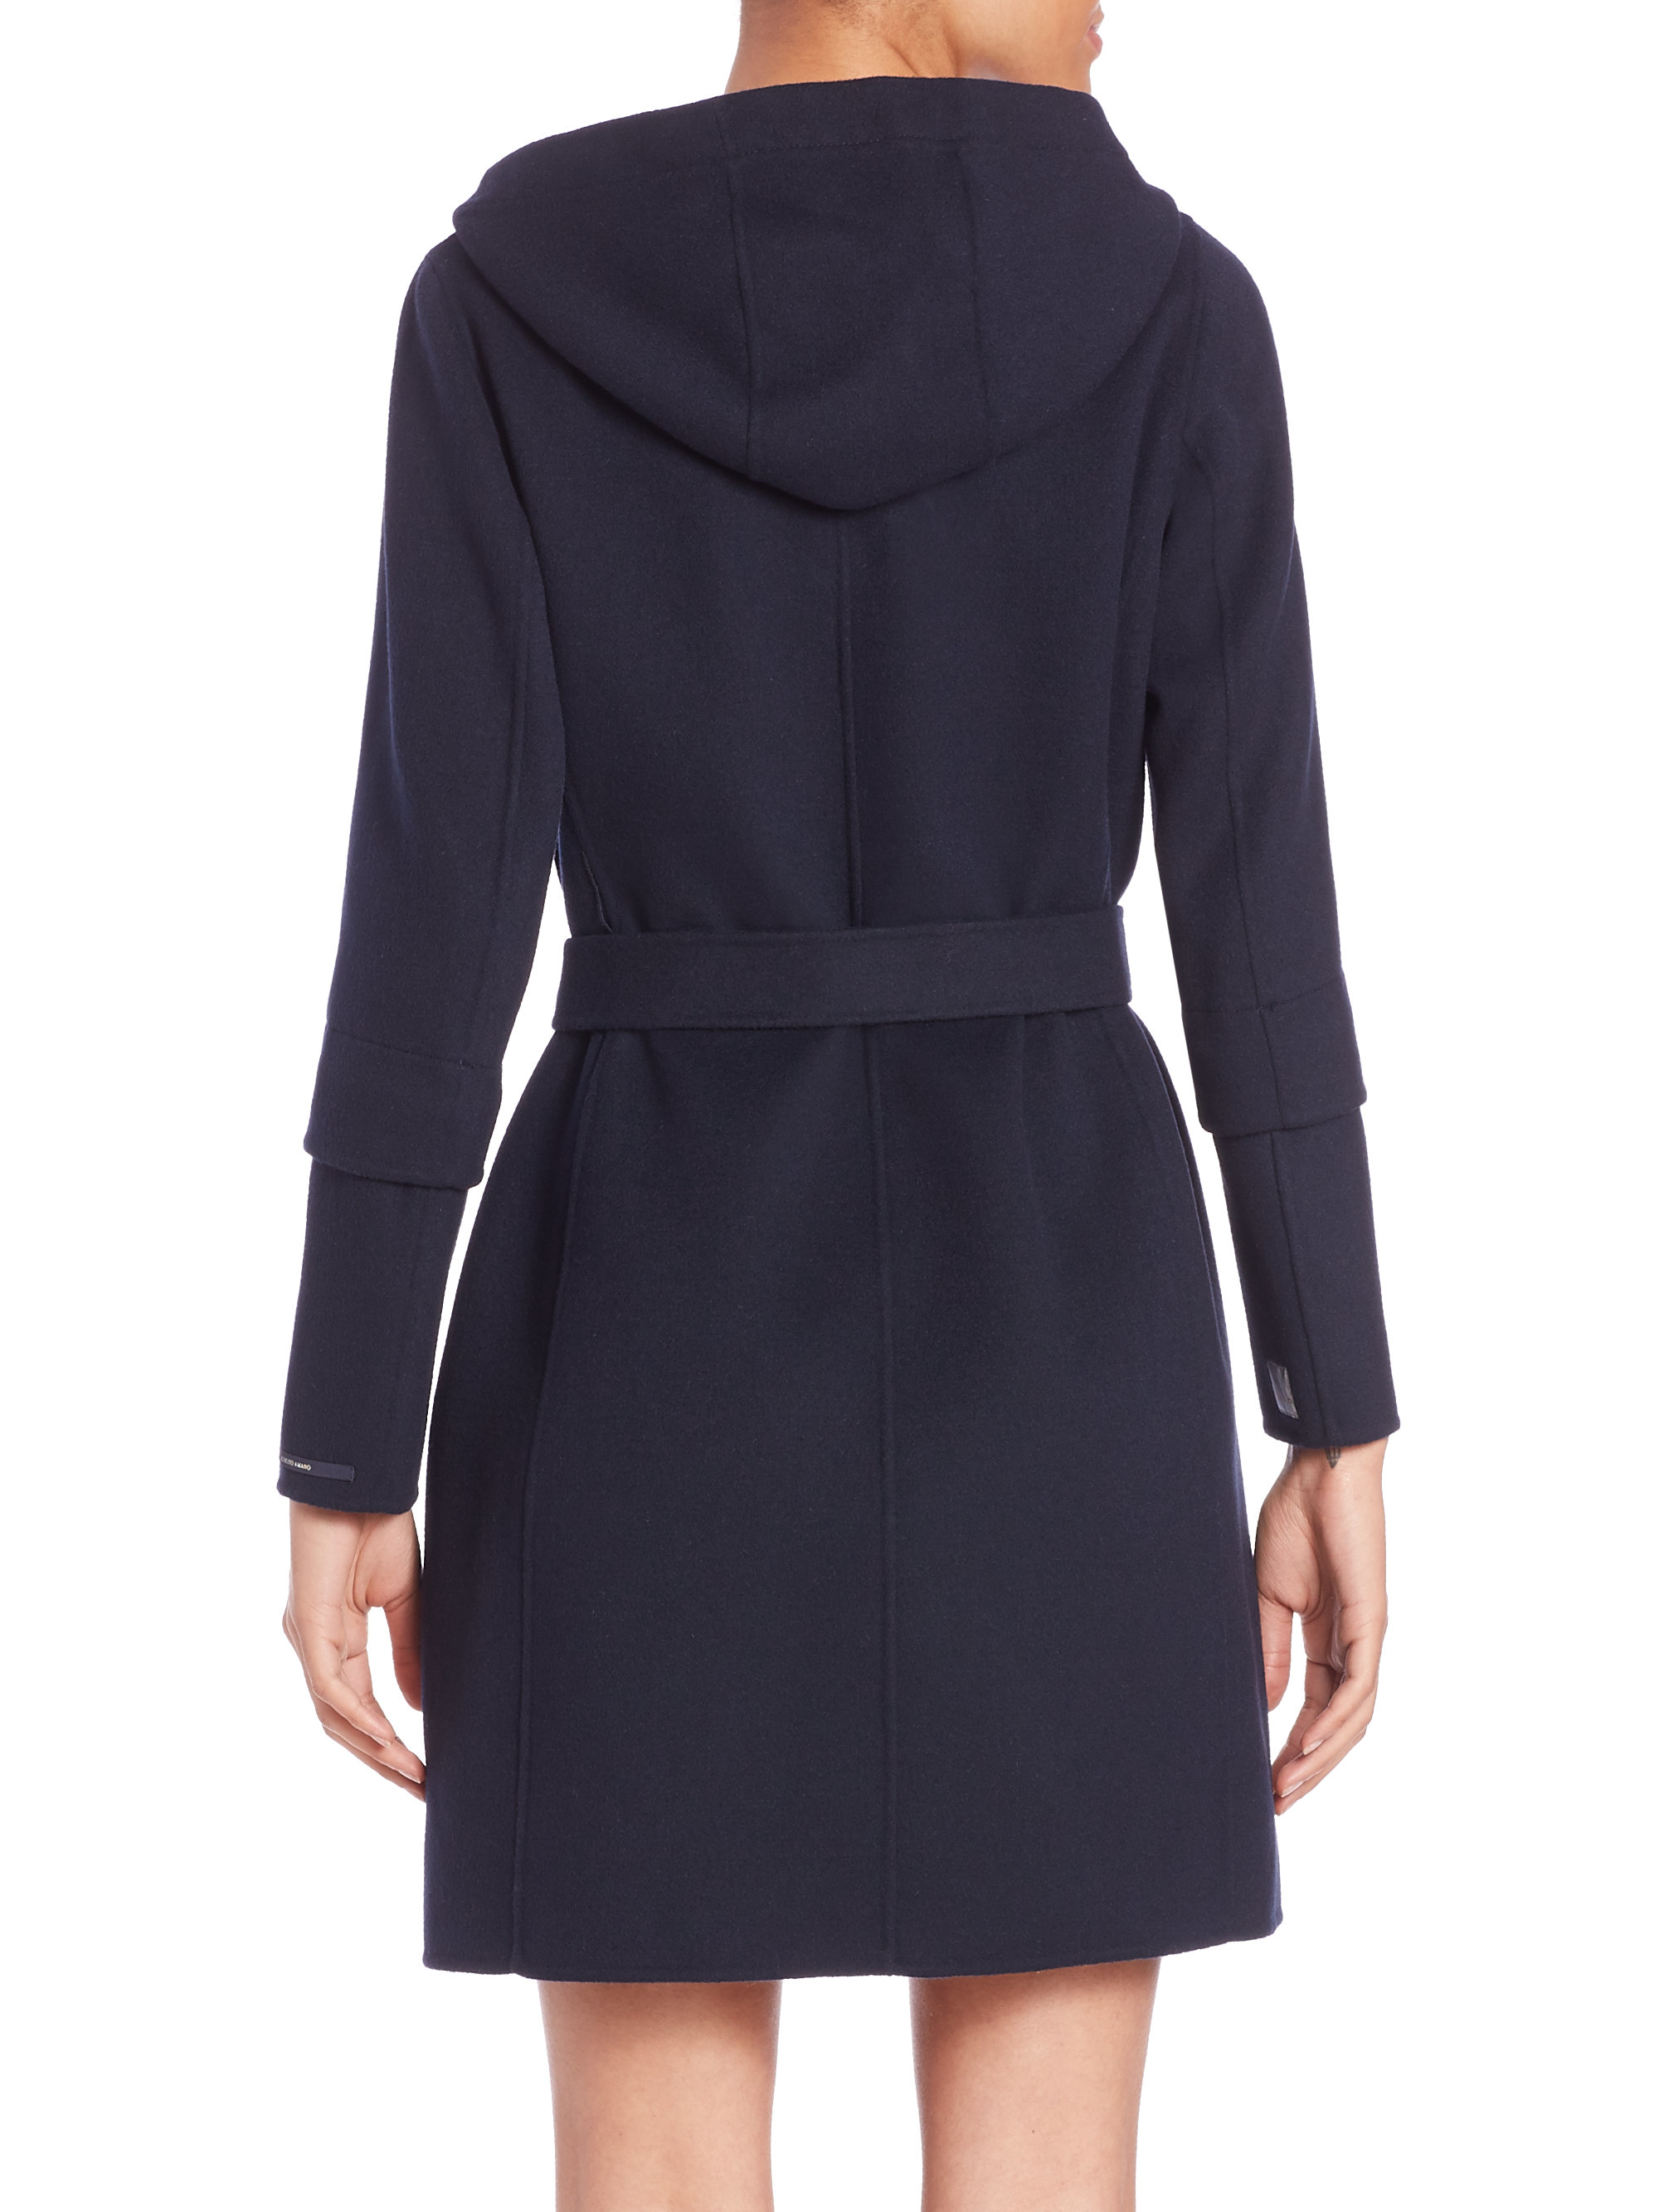 Lyst - Max Mara Cube Collection Hooded Wool Coat in Black